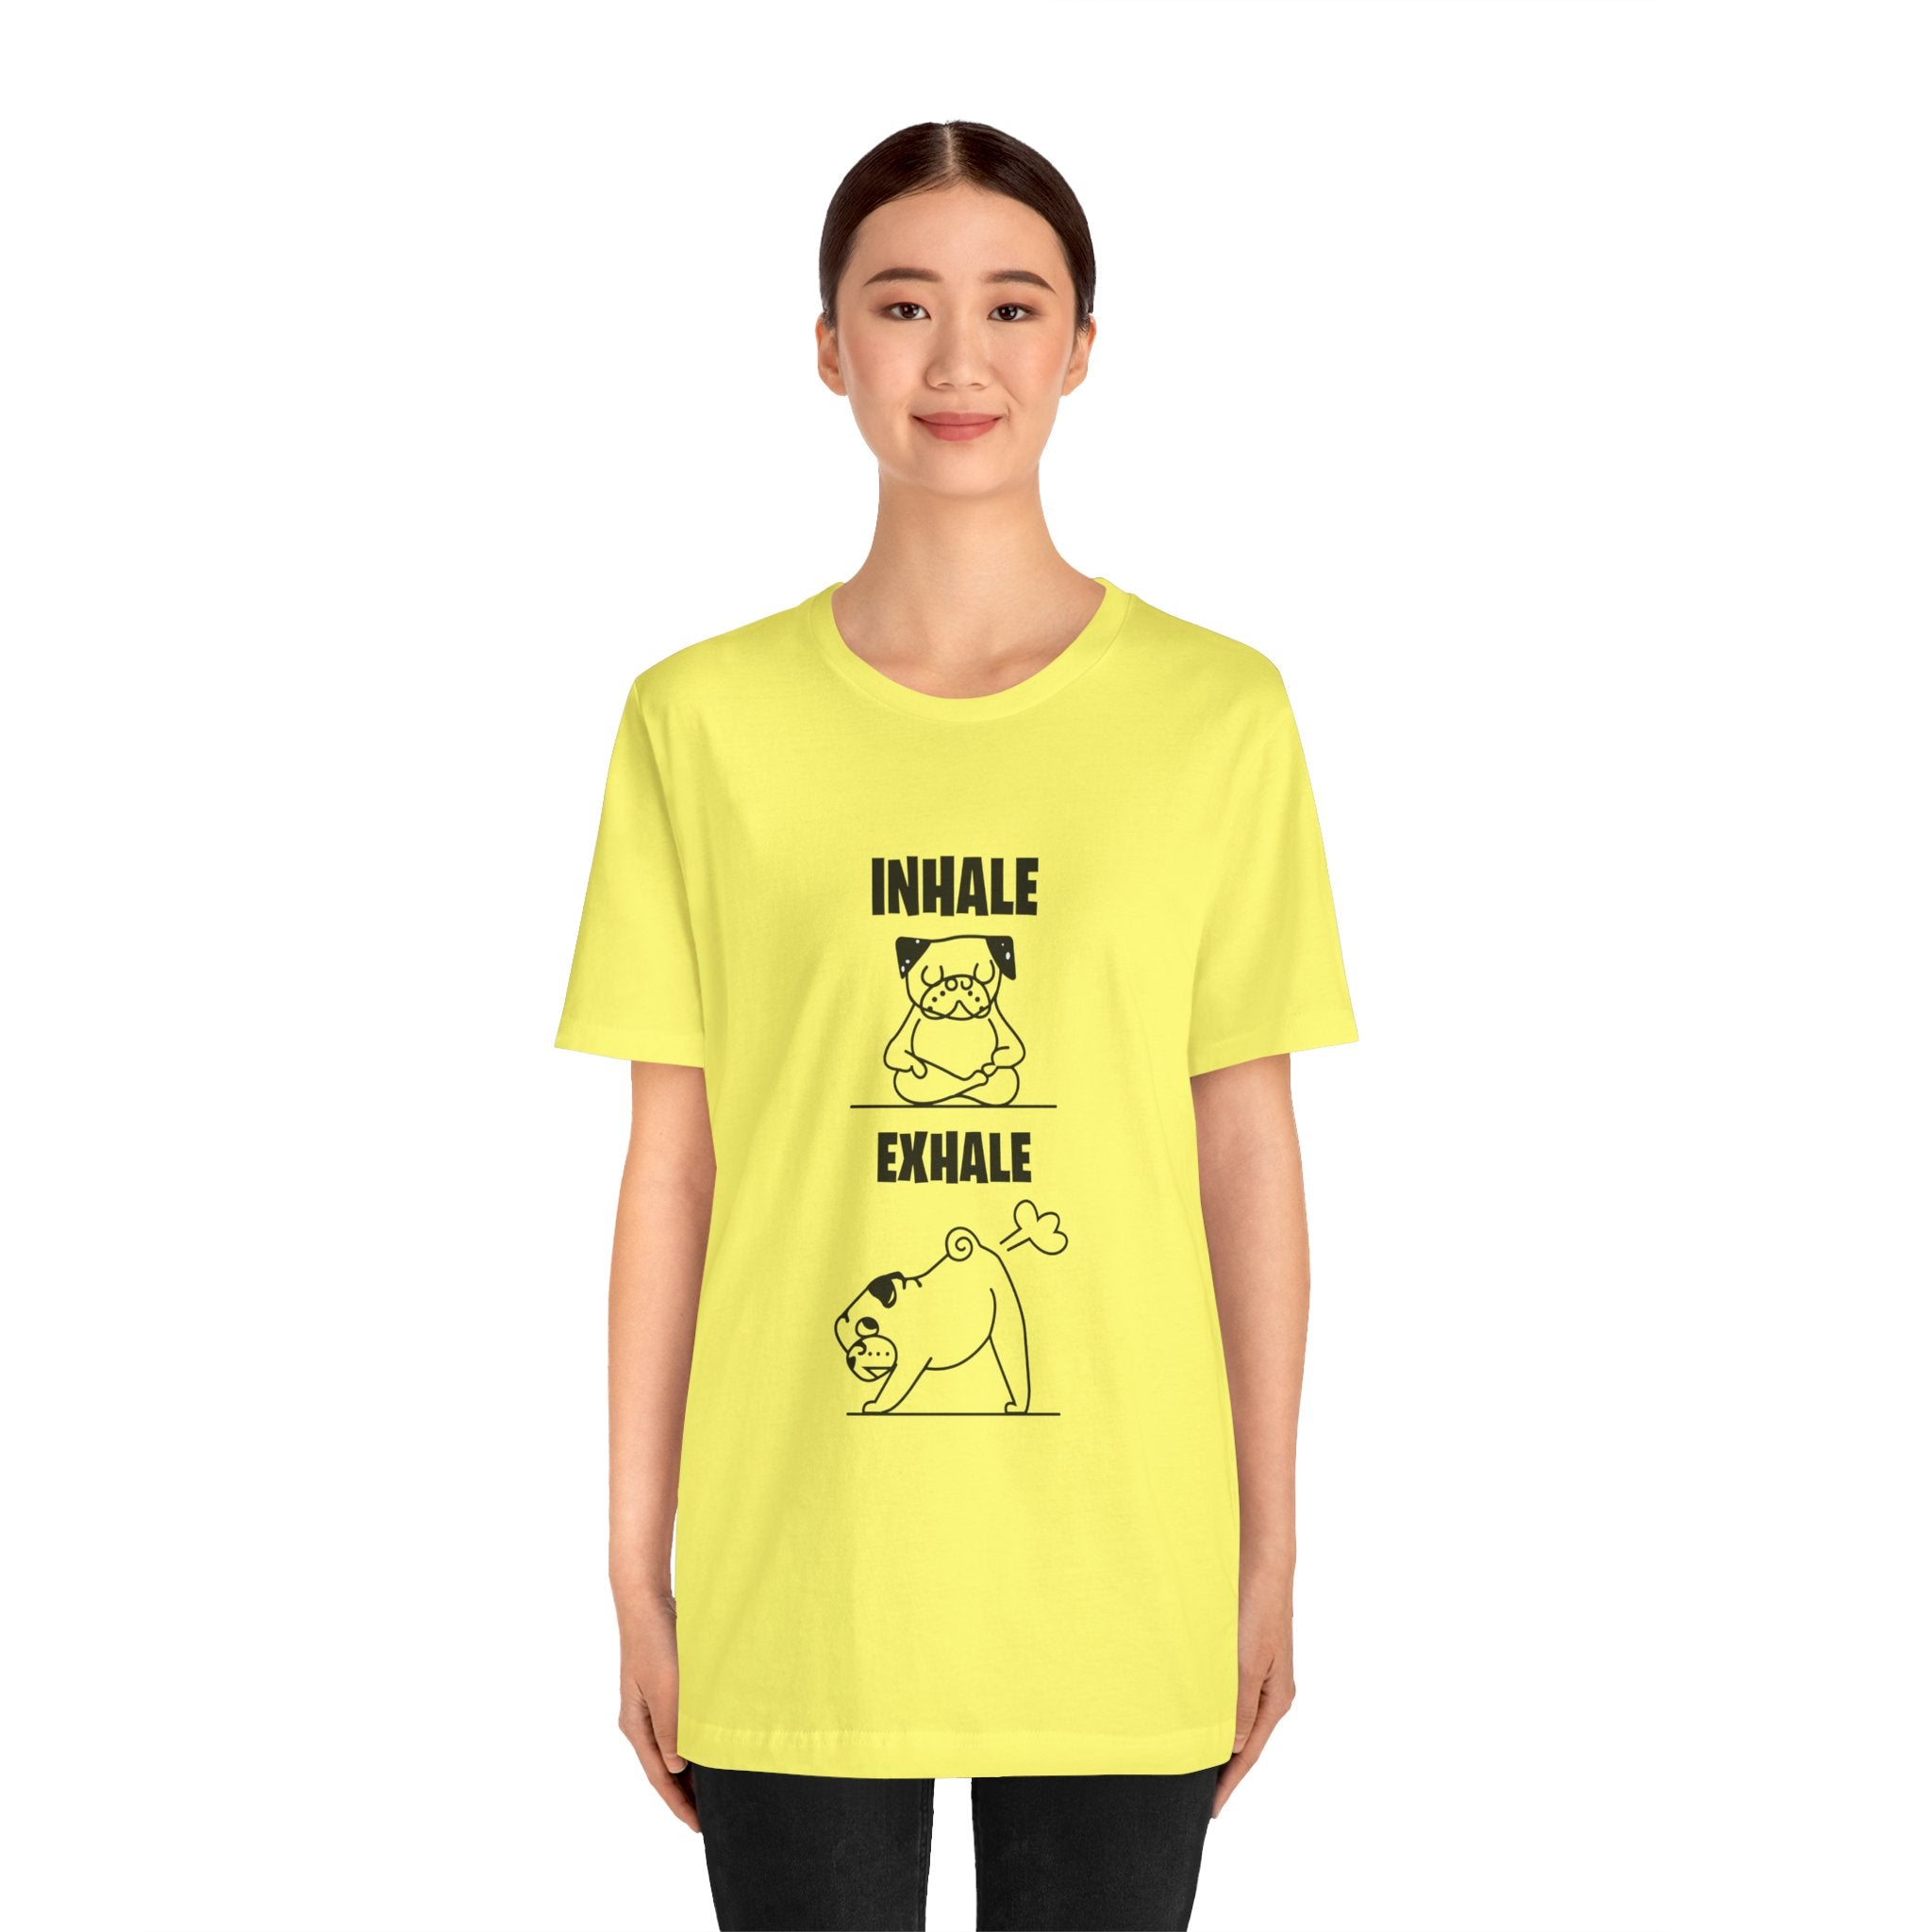 Young woman wearing a yellow unisex Dog Funny T shirt with an "inhale exhale" graphic featuring a cat and dog practicing yoga.